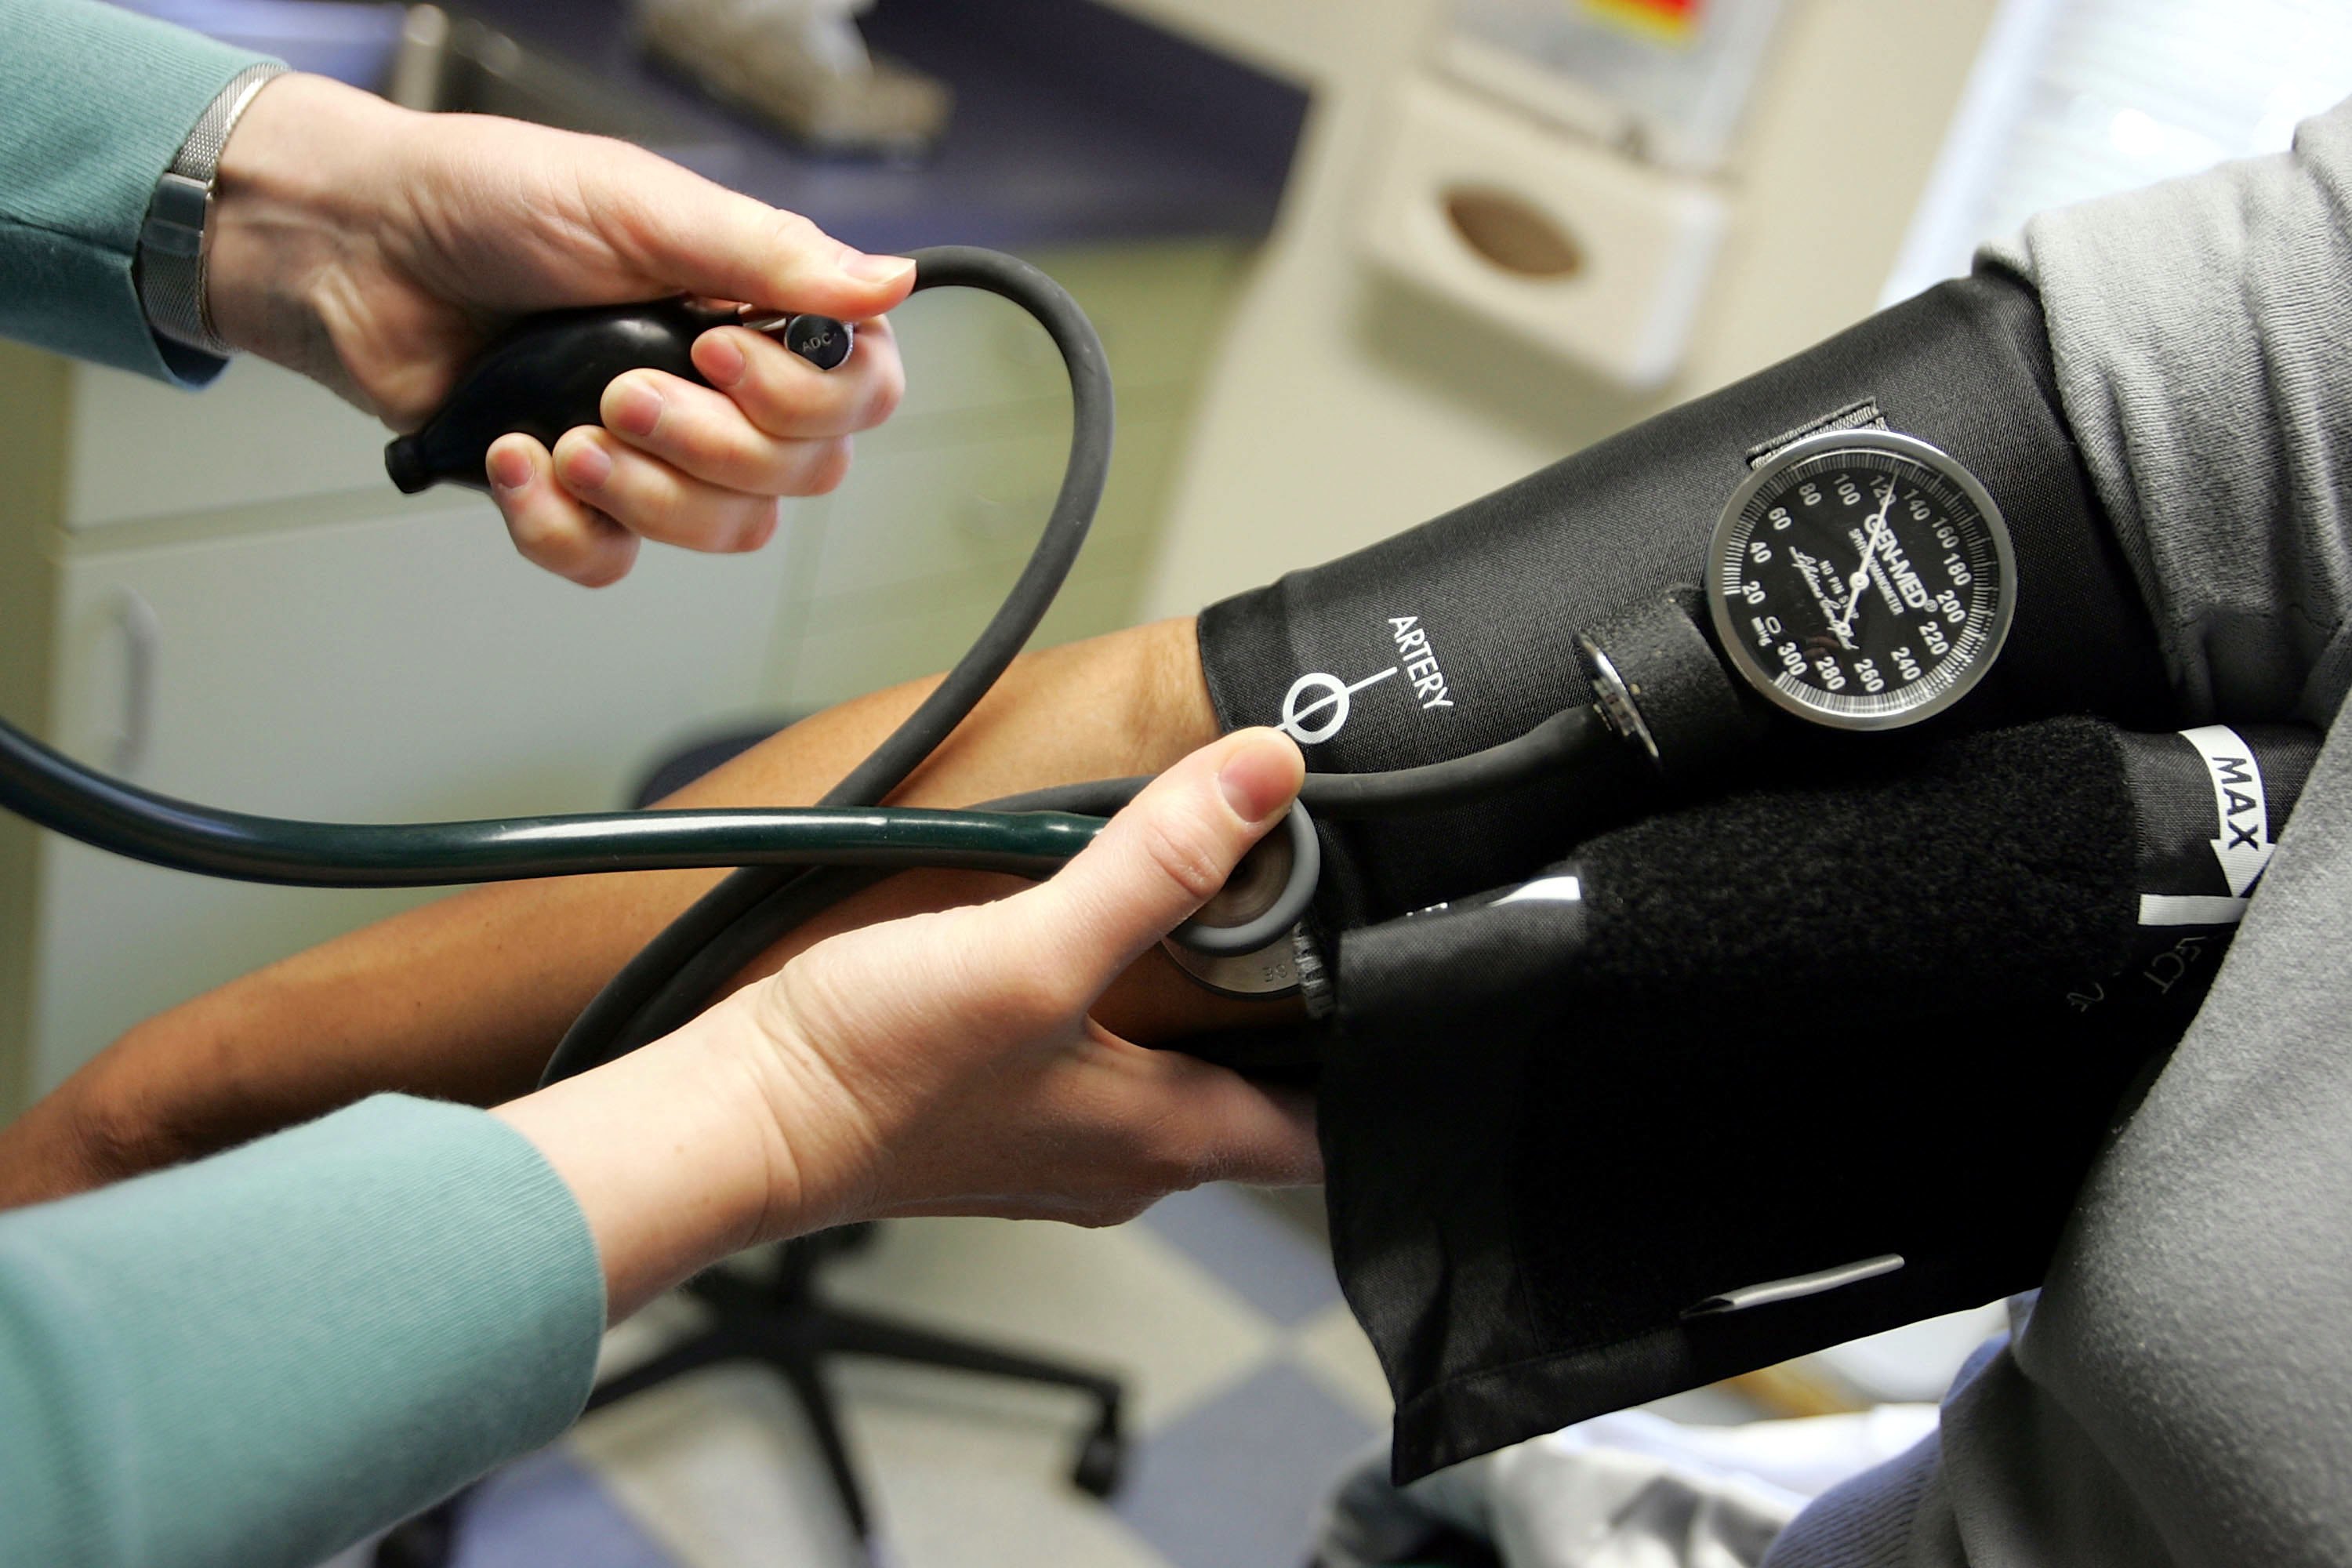 Pms And High Blood Pressure Might Be Linked Says Study So